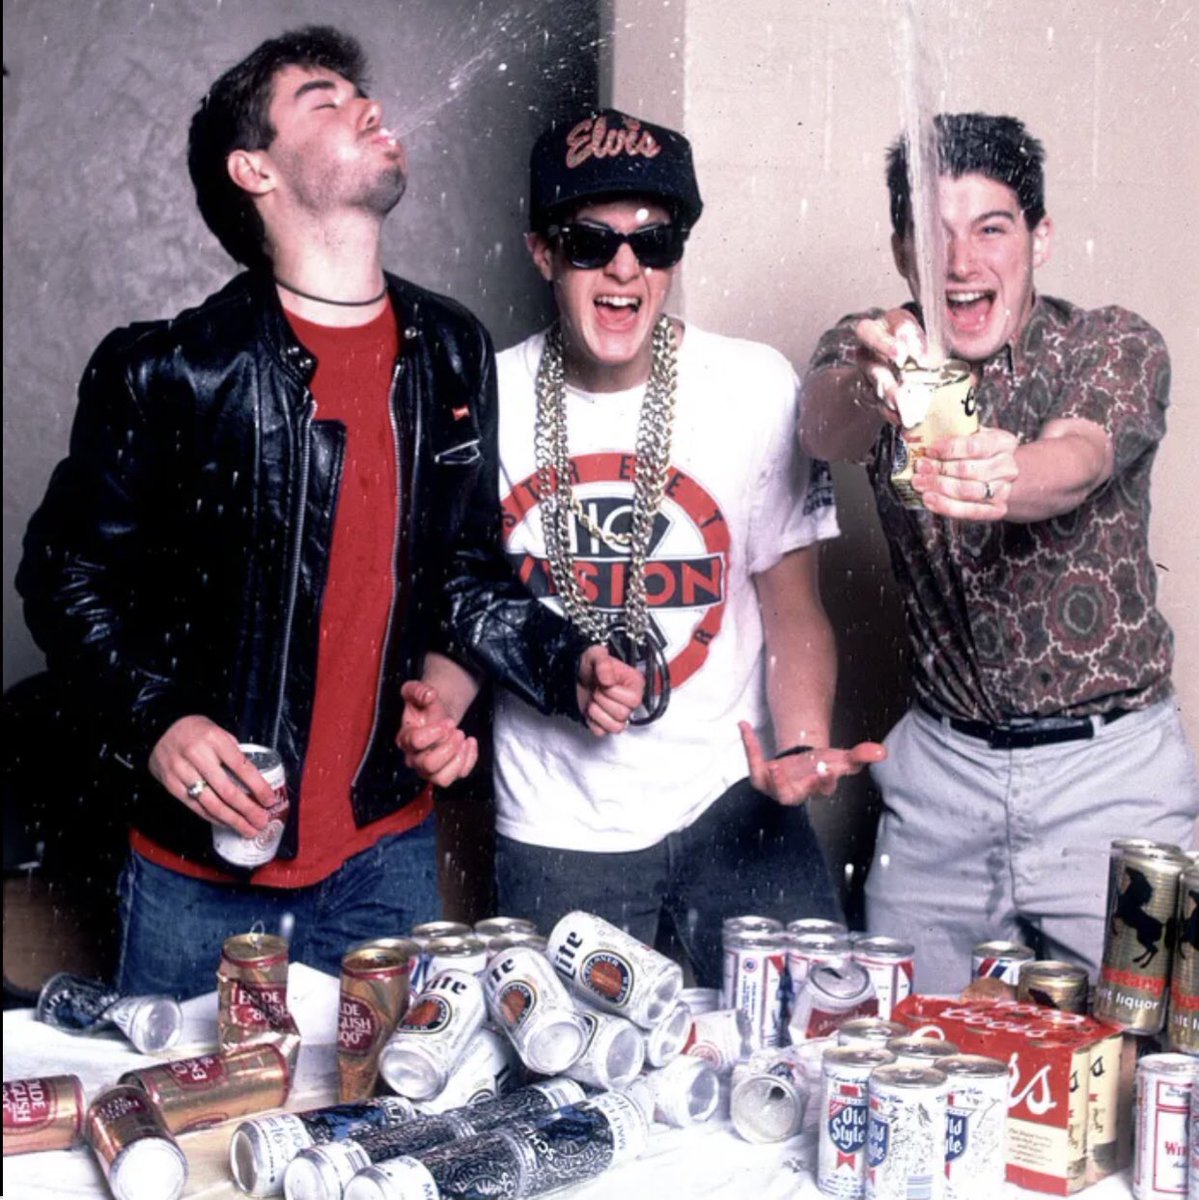 Just Me and My Horsy and a Quart of Beer.

#BeastieBoys #AdamYauch #MikeD #AdRock #Music #HipHop